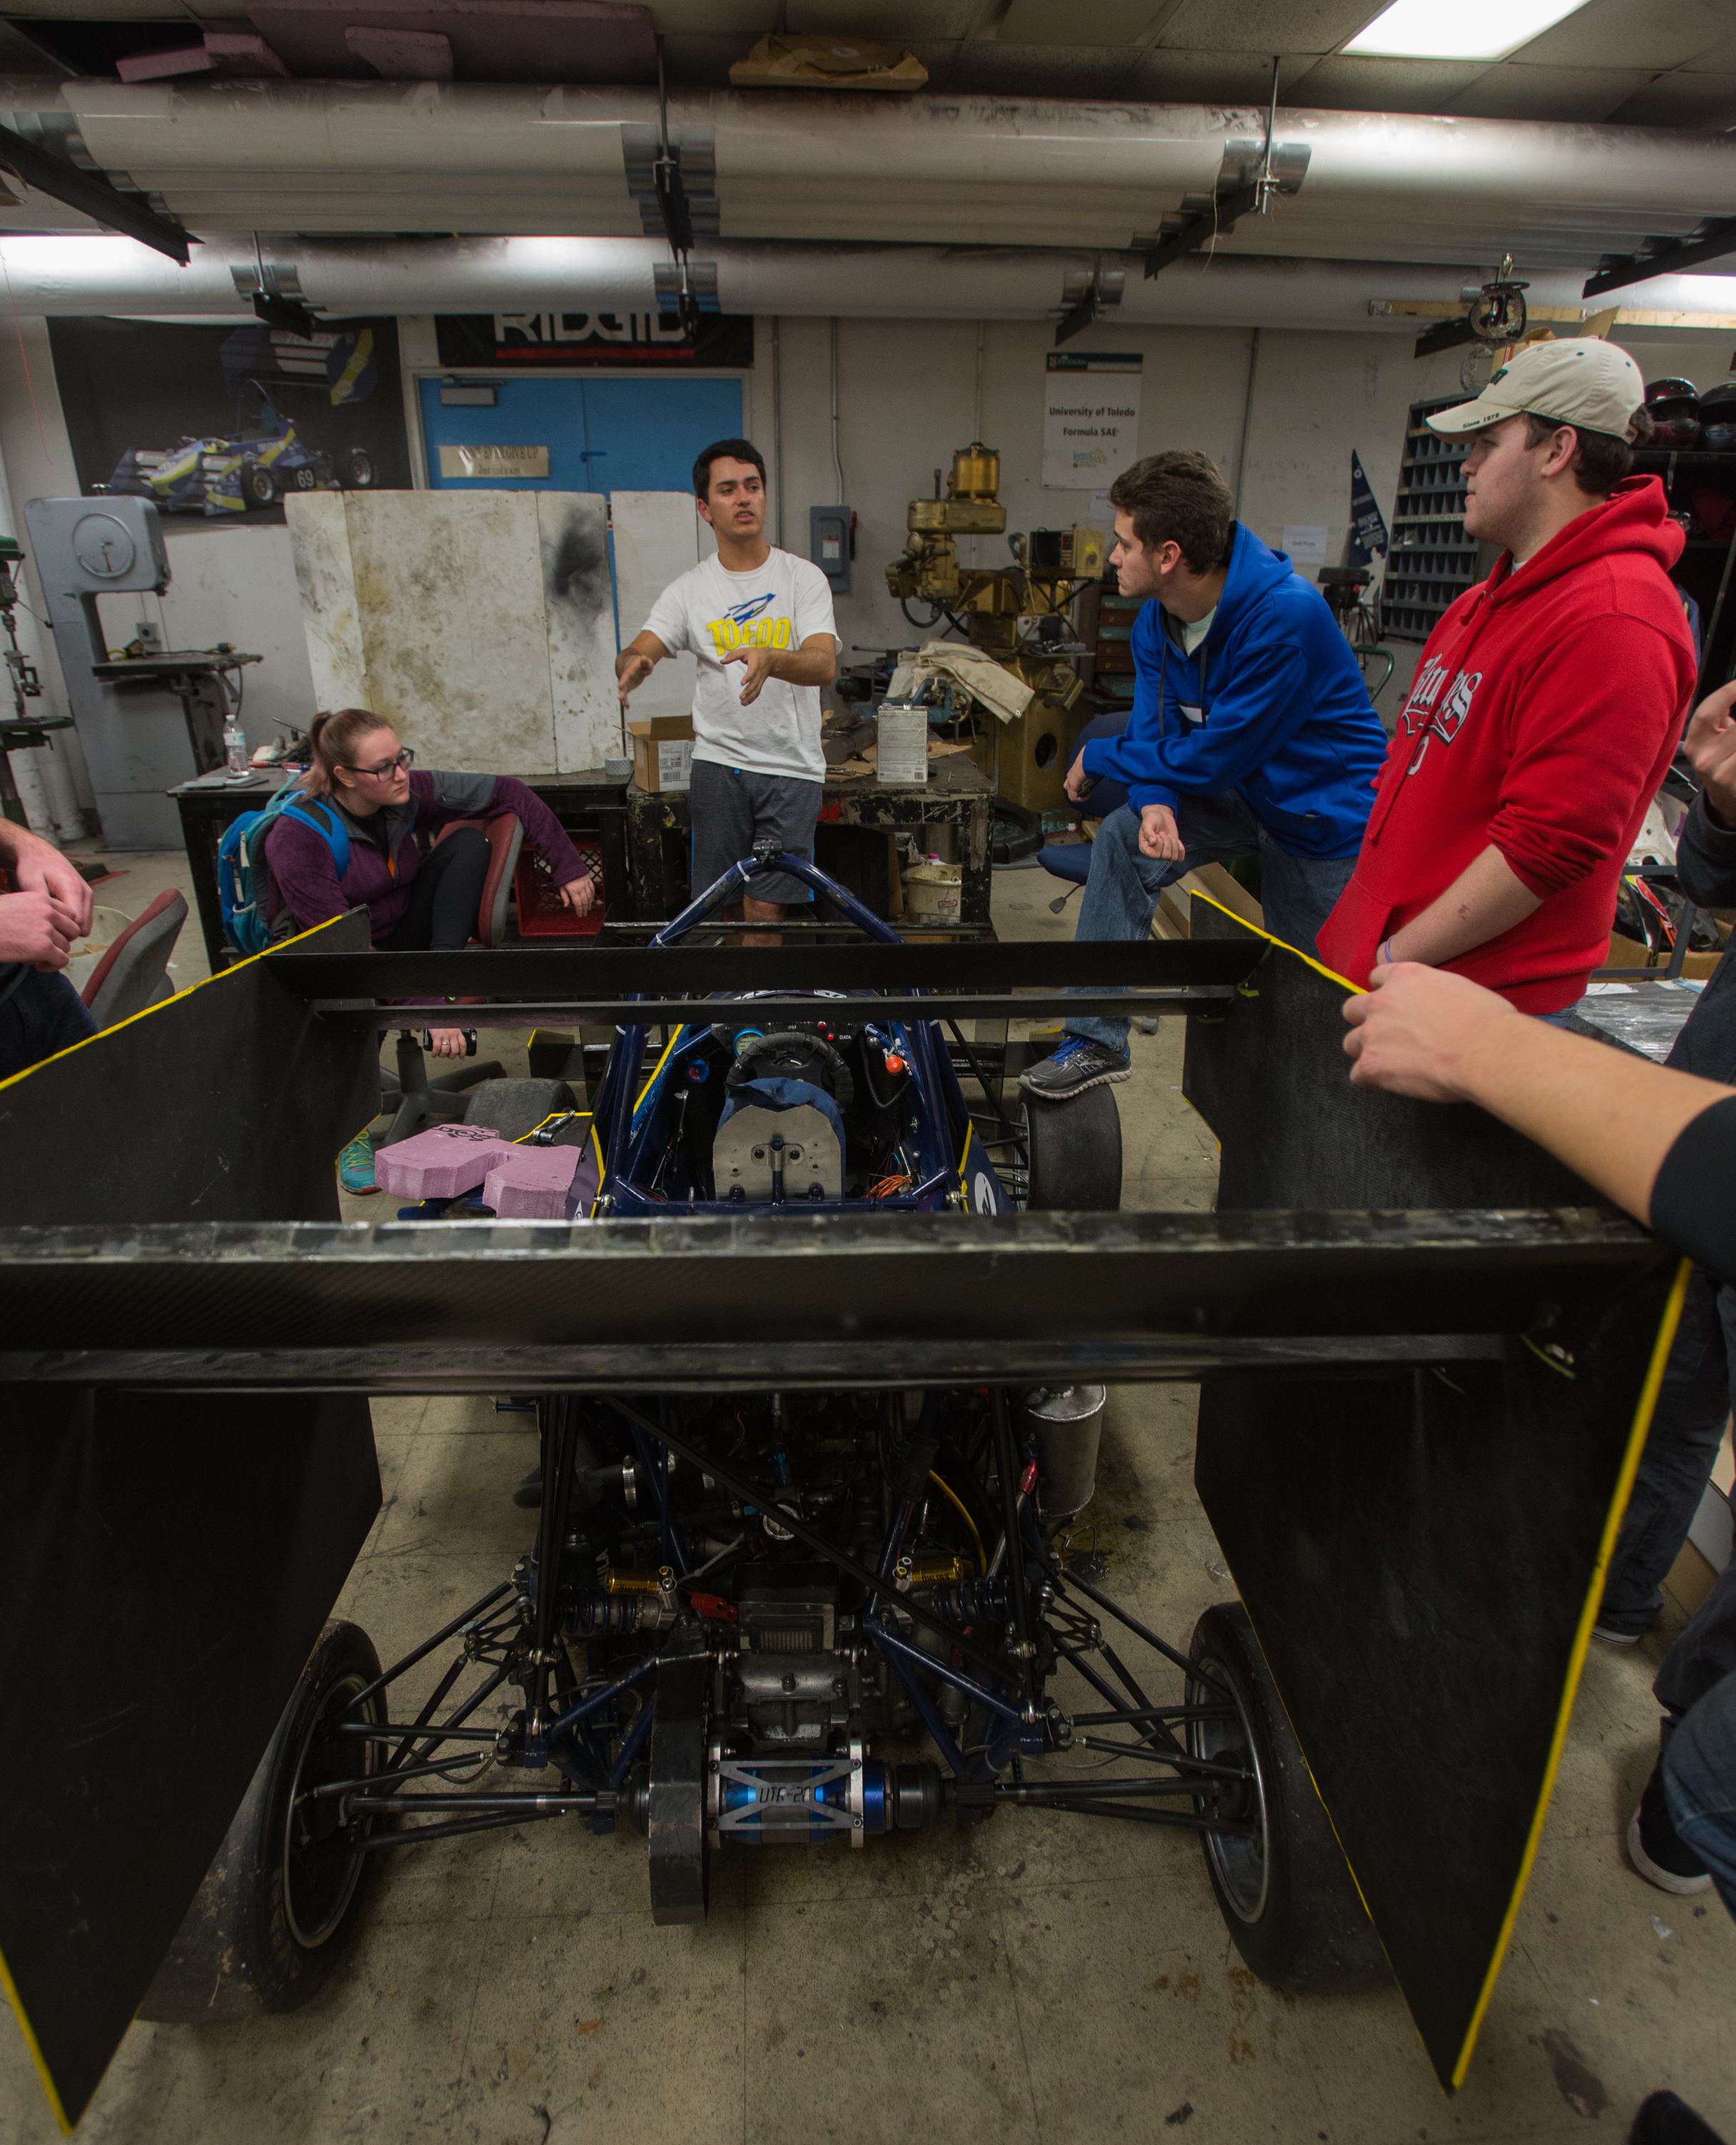   Aerodynamics group lead Jonathan Lesiecki leads a meeting for new team members interested in joining the aero group in the Formula SAE team lab in the University of Toledo’s North Engineering Building.  